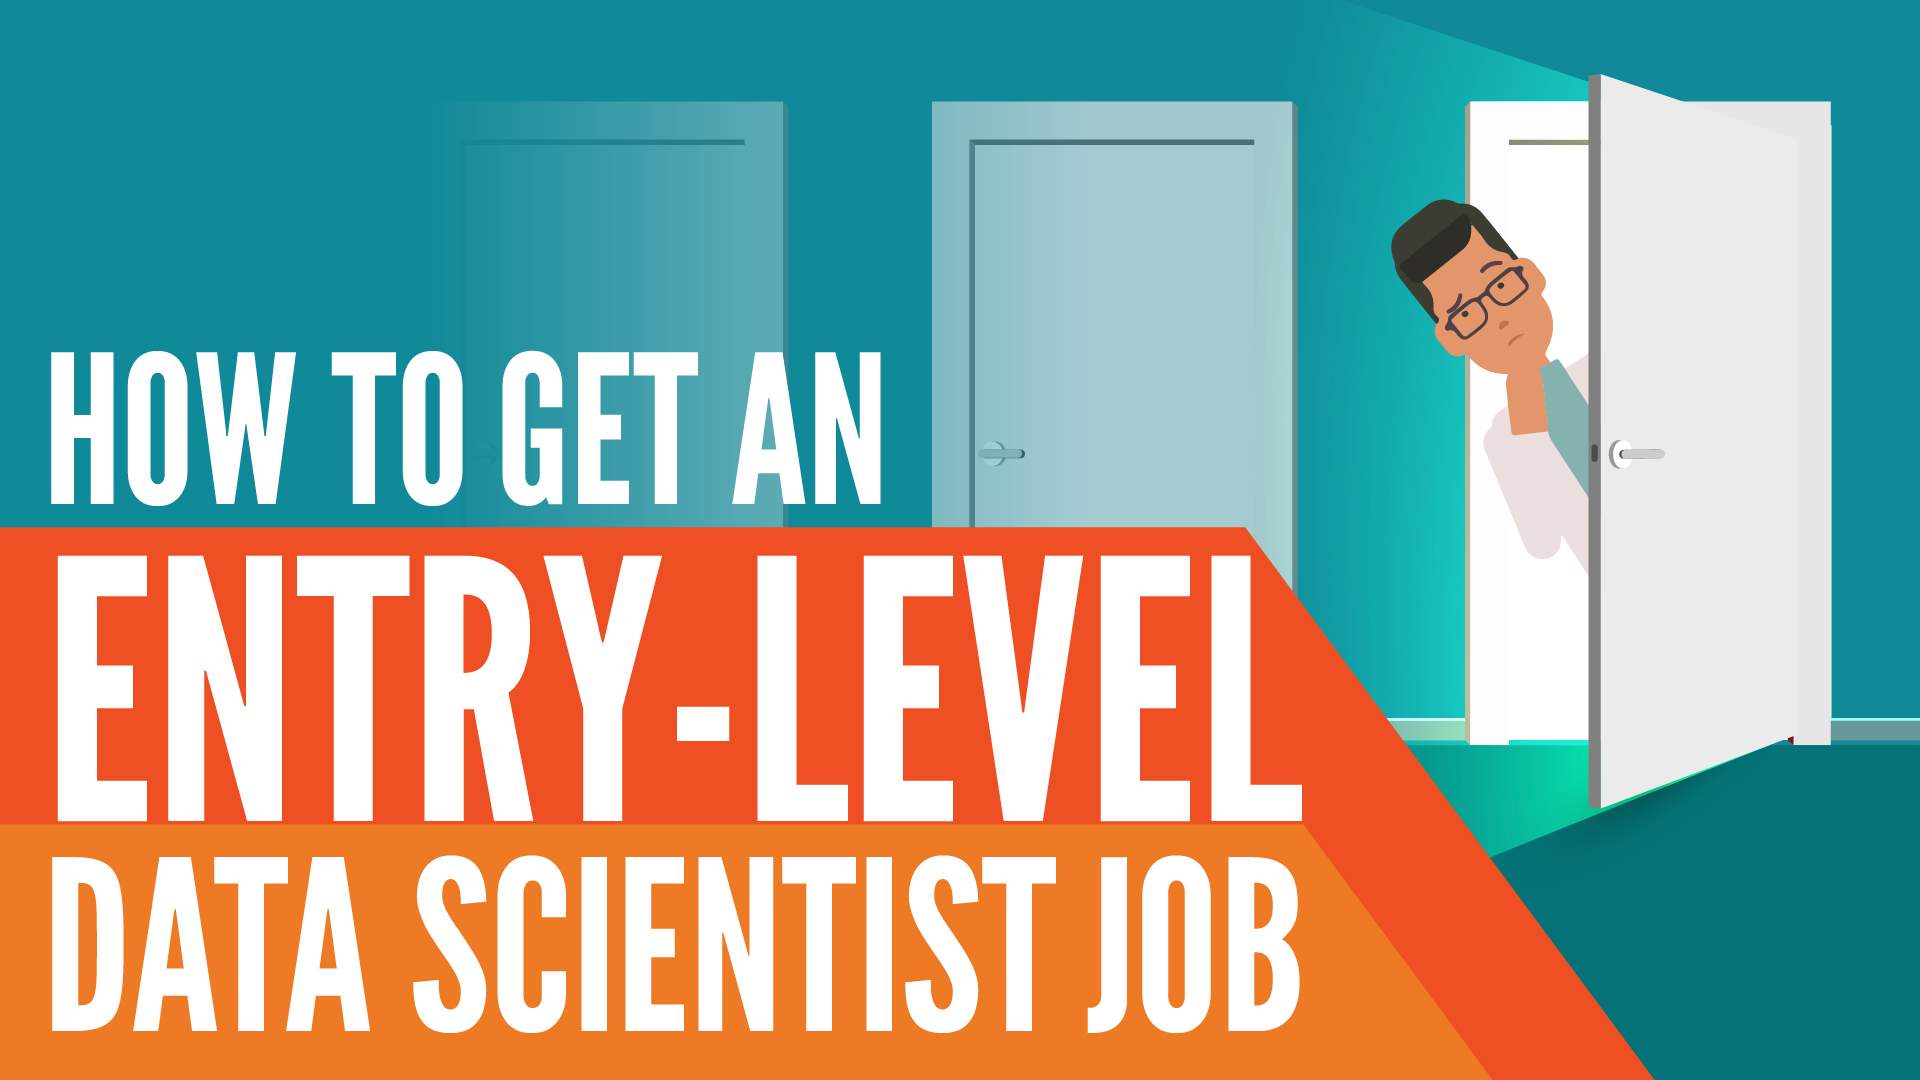 How to Get an Entry-Level Data Scientist Job: Education, Experience